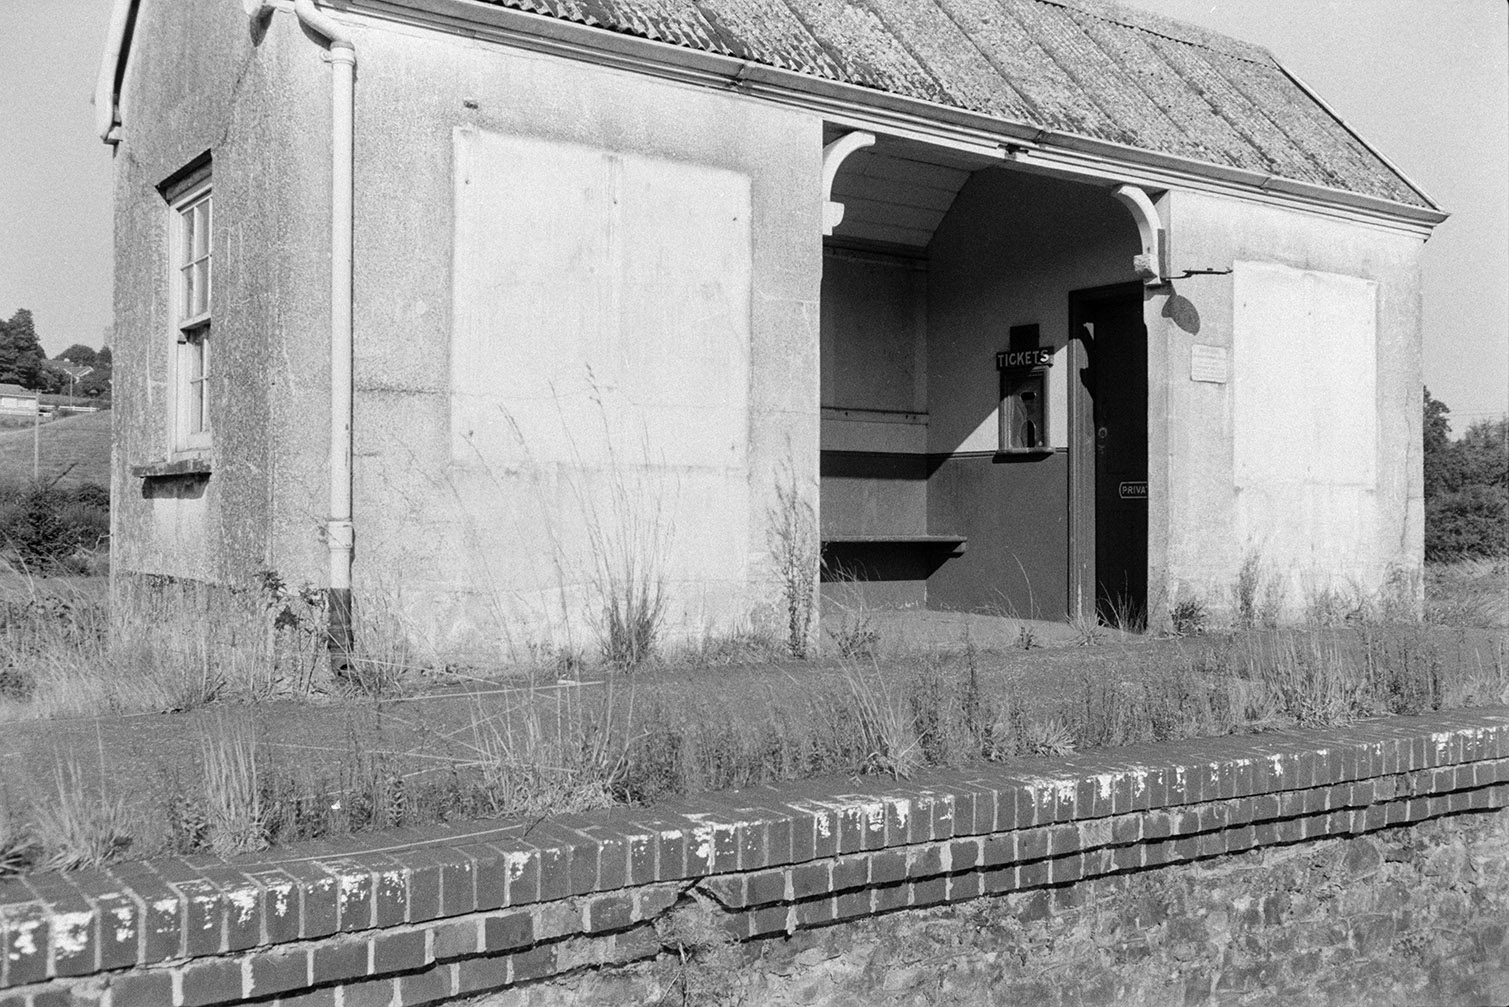 Railway platform, possibly at Lapford Railway Station. There is a shelter with a corrugated iron roof which has a ticket booth inside. The edge of the platform is overgrown with weeds.